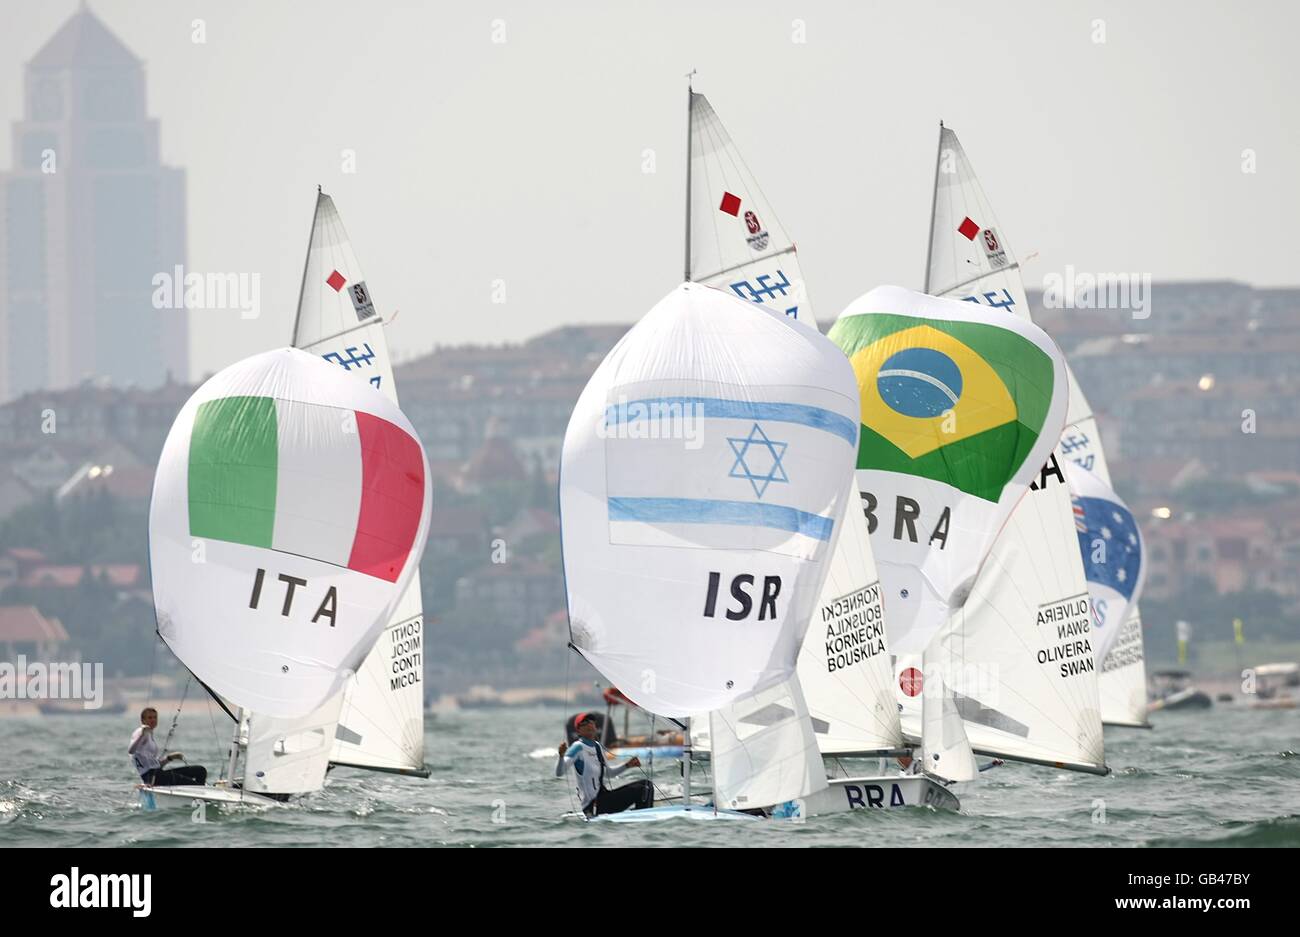 (l-r) Italy's Giulia Conti and Giovanna Micol, Israel's Nike Lornecki and Vered Bouskila and Brazil's Fernanda Oliveira and Isabel Swan compete in their final class race of the Women's 470 class during the 2008 Beijing Olympic Games' Sailing Centre in Qingdao, China. Stock Photo